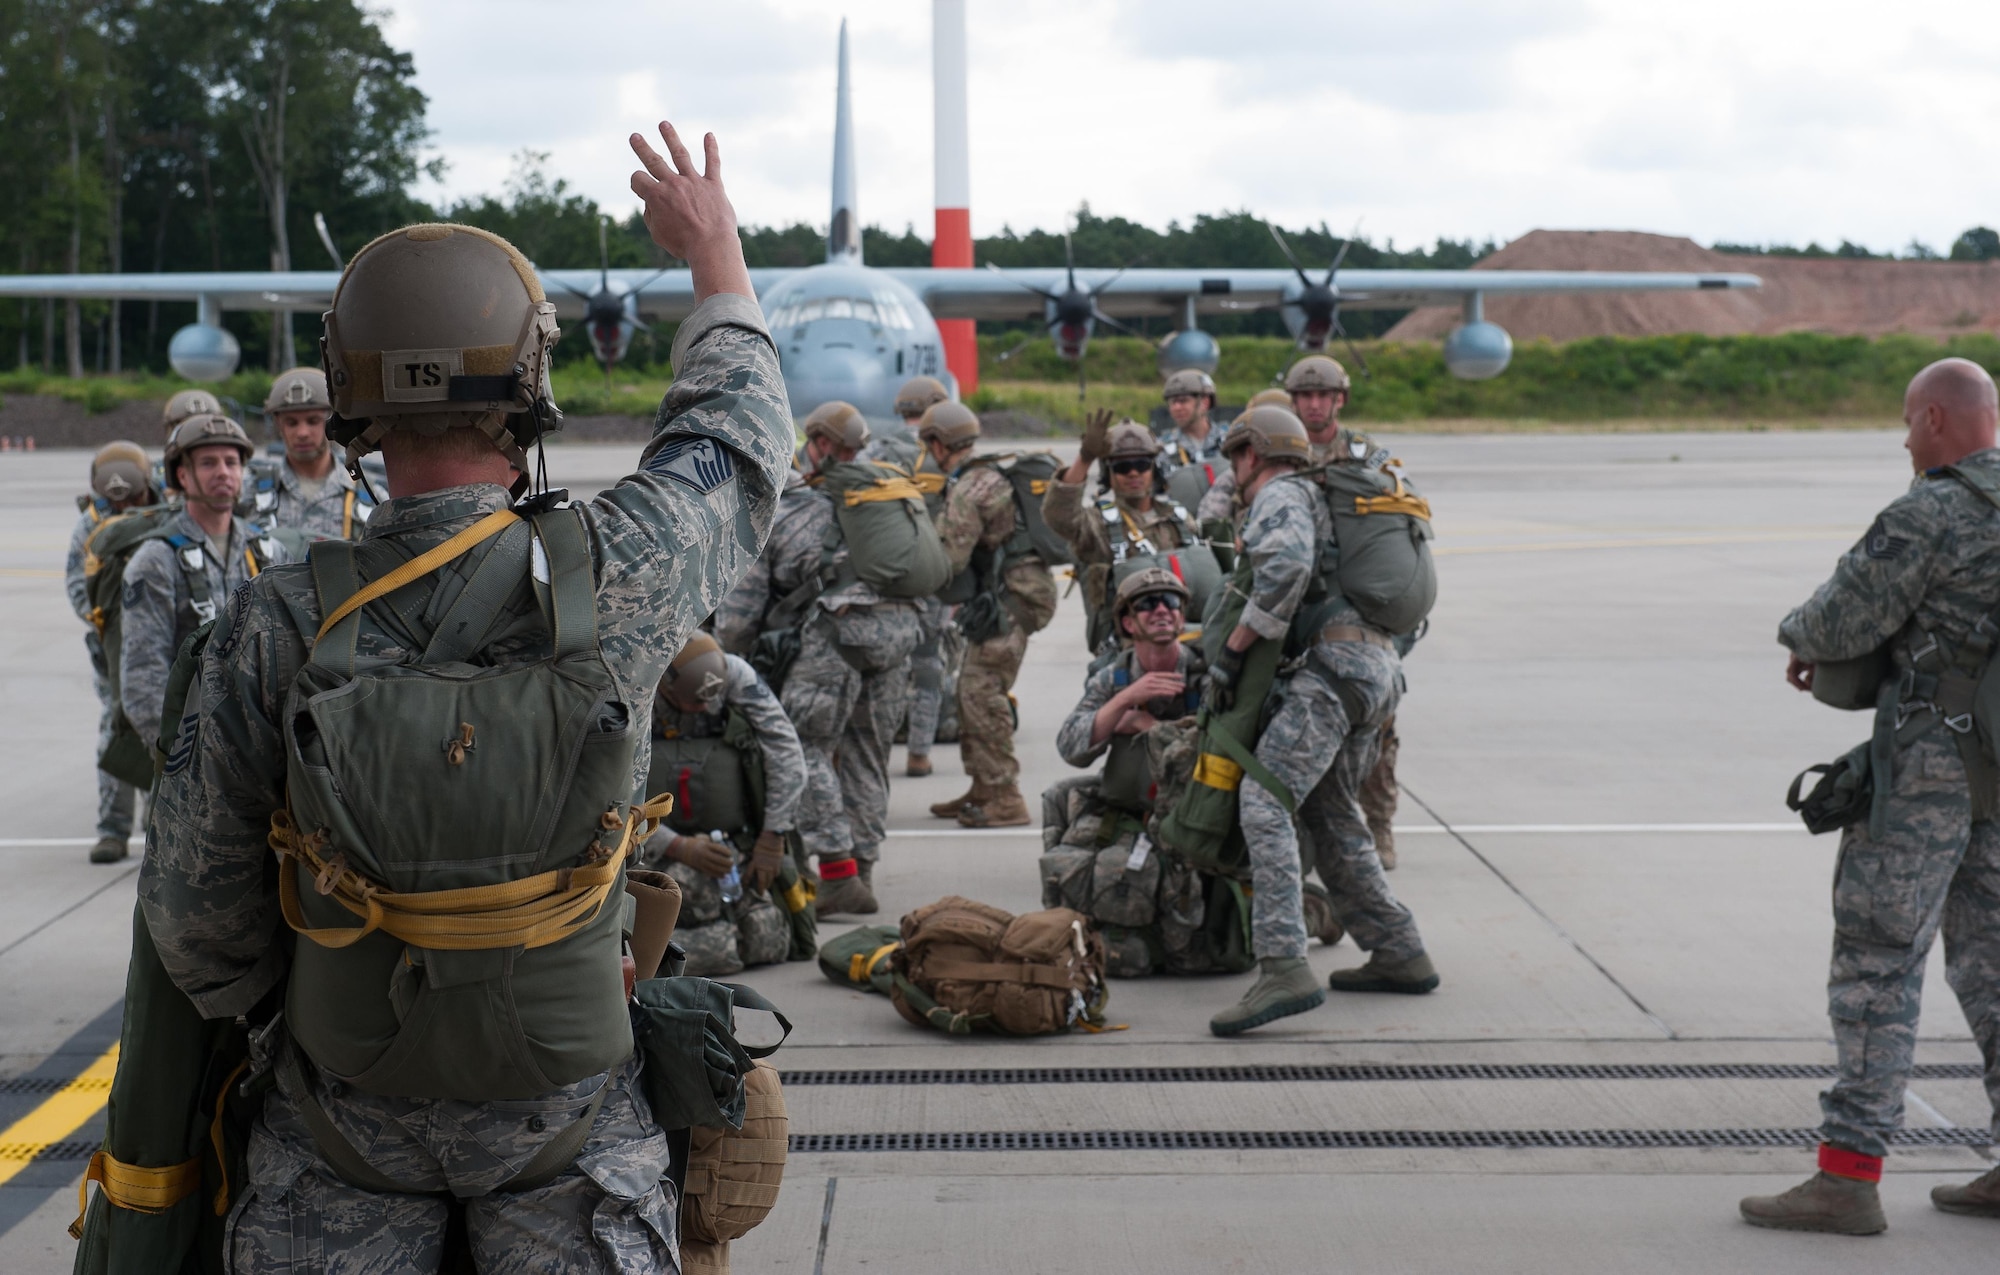 Airmen from the 2nd Air Support Operations Squadron prepare to board a C-130J Super Hercules during a Joint Airborne Air Transportability Training exercise June 30, 2016, at Ramstein Air Base, Germany. The exercise involved the 37th Airlift Squadron flying 2nd ASOS Airmen over a landing zone in France, where they successfully jumped and landed. (U.S. Air force photo/Airman 1st Class Lane T. Plummer)